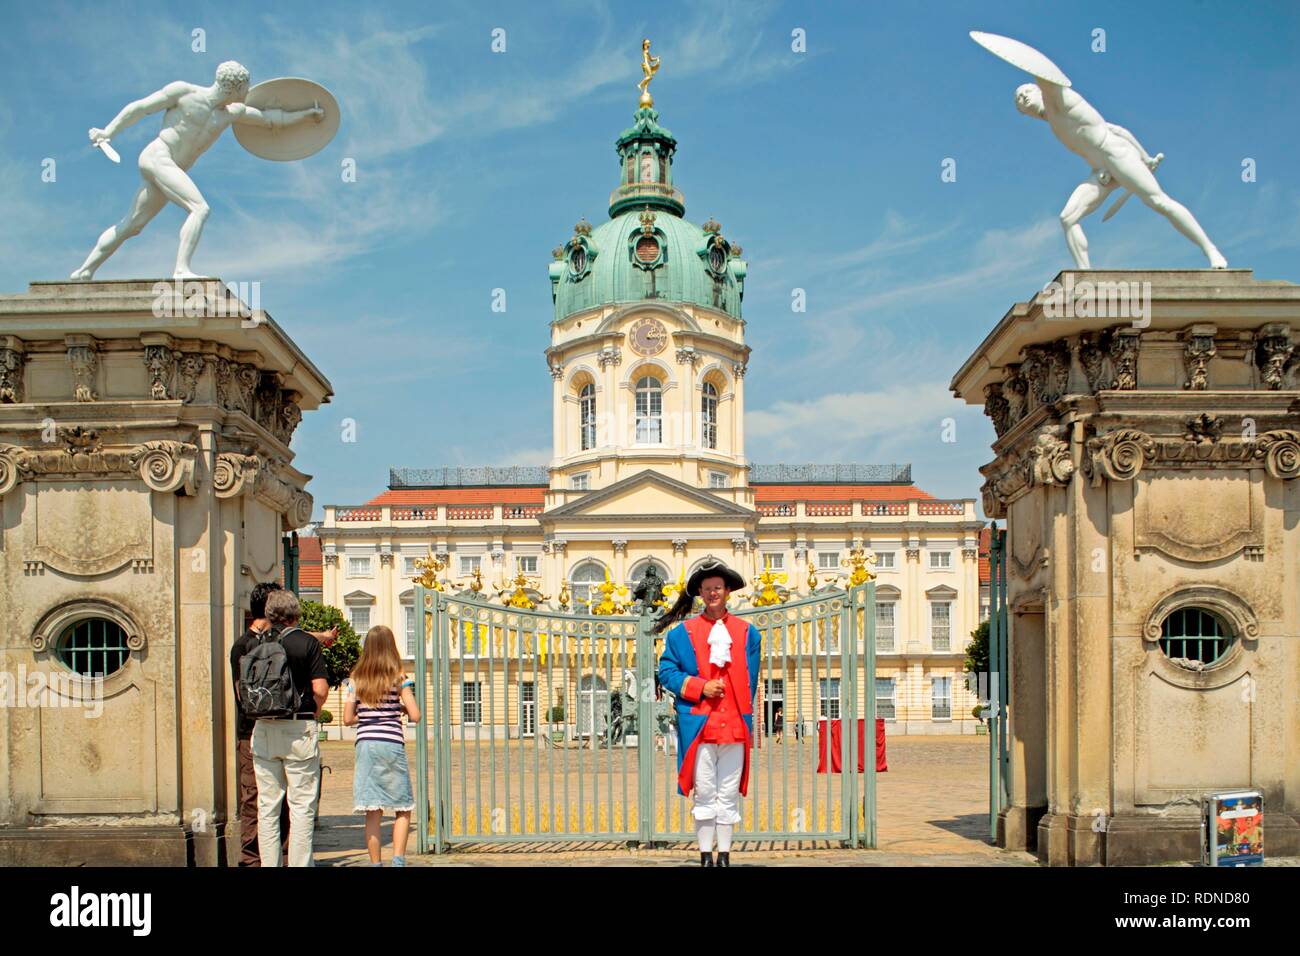 Historically dressed guard in front of Schloss Charlottenburg Palace, Berlin Stock Photo